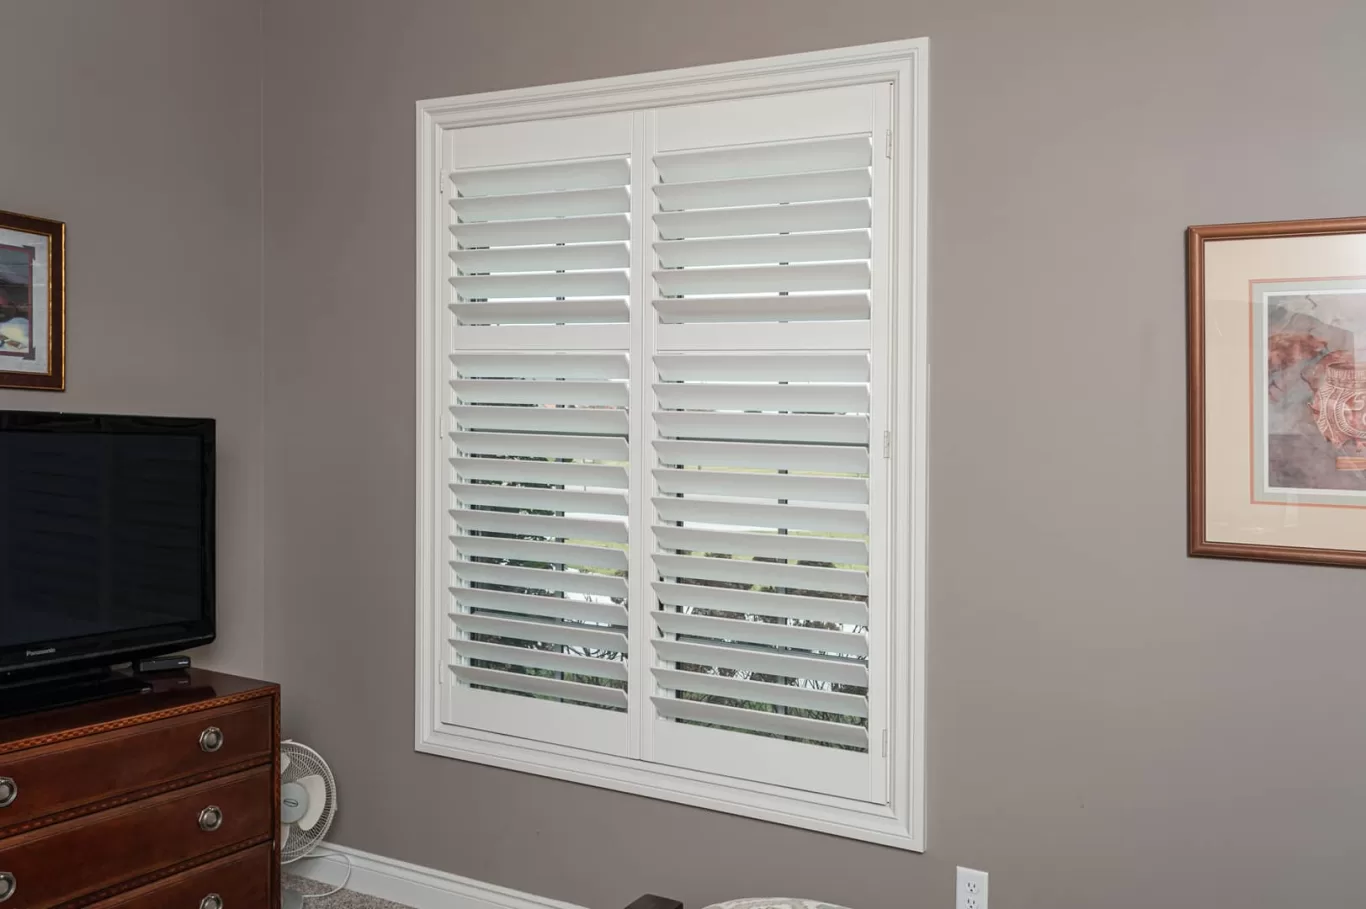 Louver Shop Heritage Wood Shutters installation in a bedroom